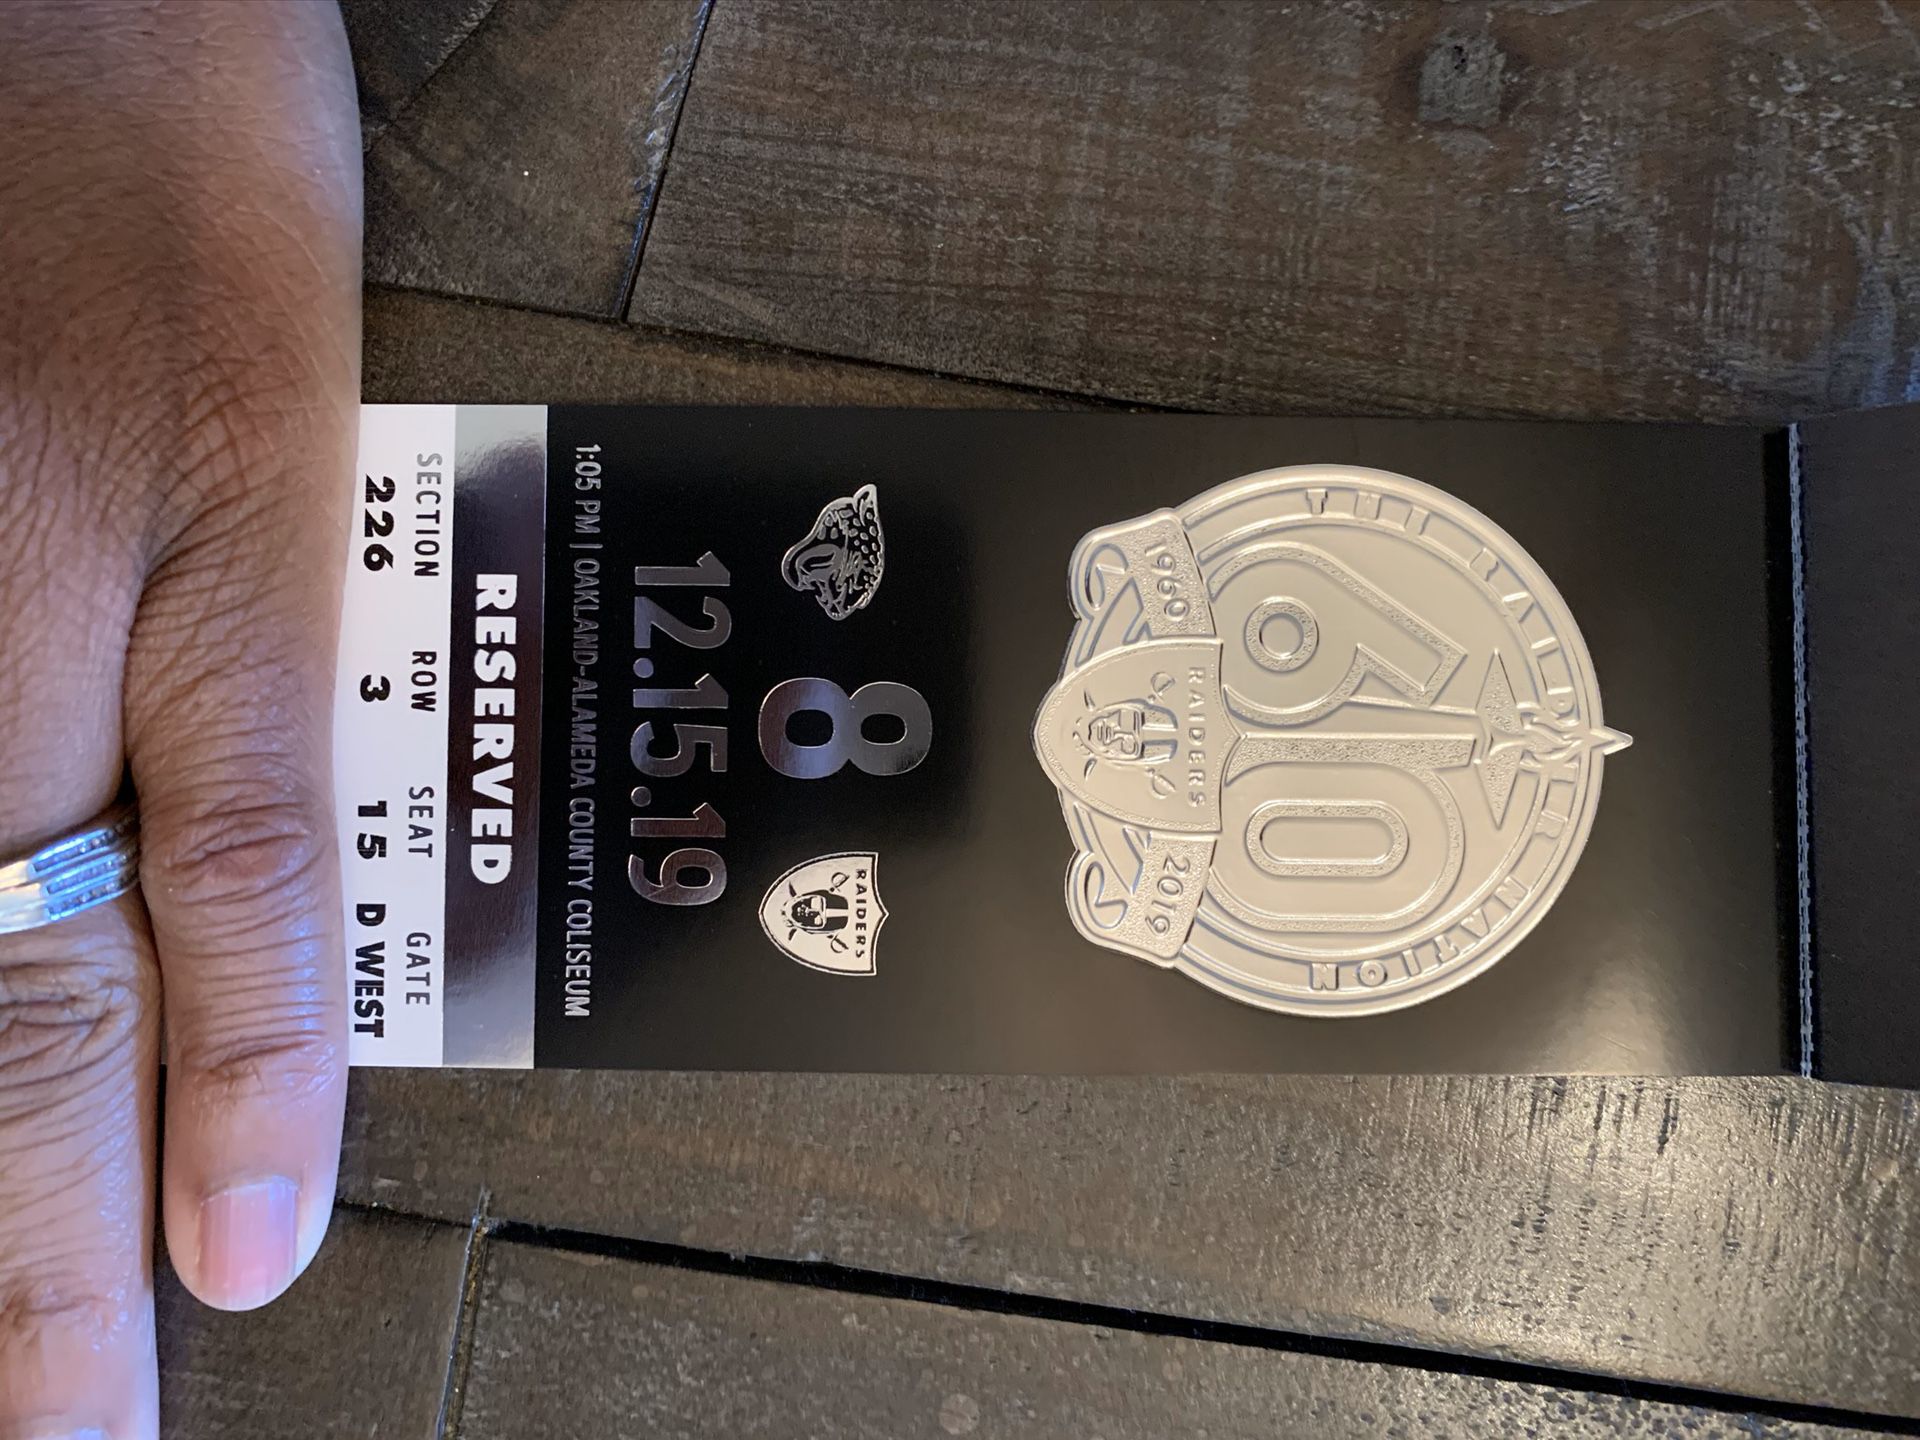 Raiders vs Jaguars section 226 row 3 seat 16 only